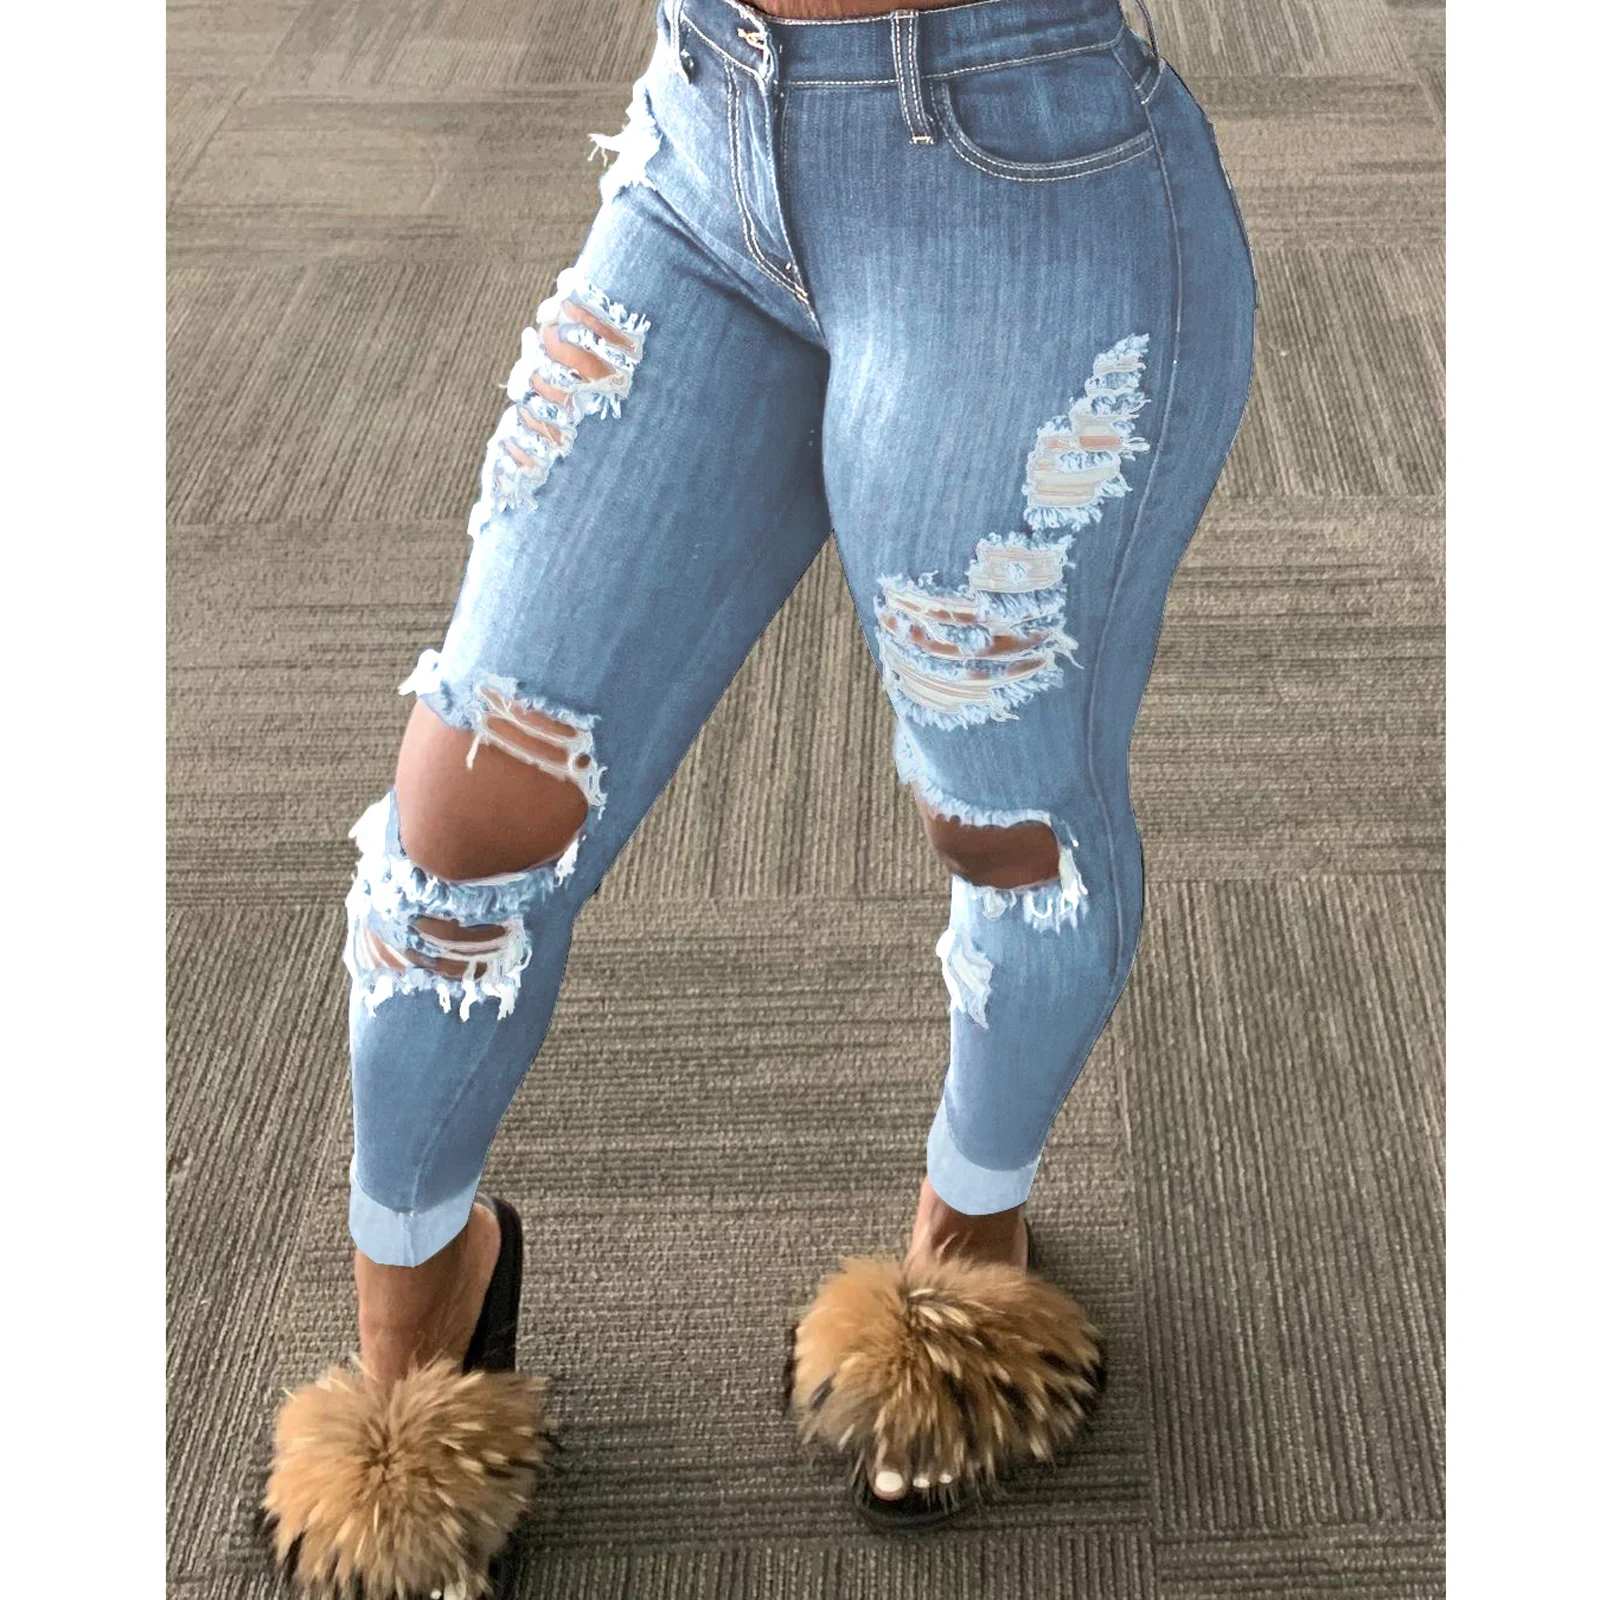 Women's Skinny Fit High Waist Ripped Jeans